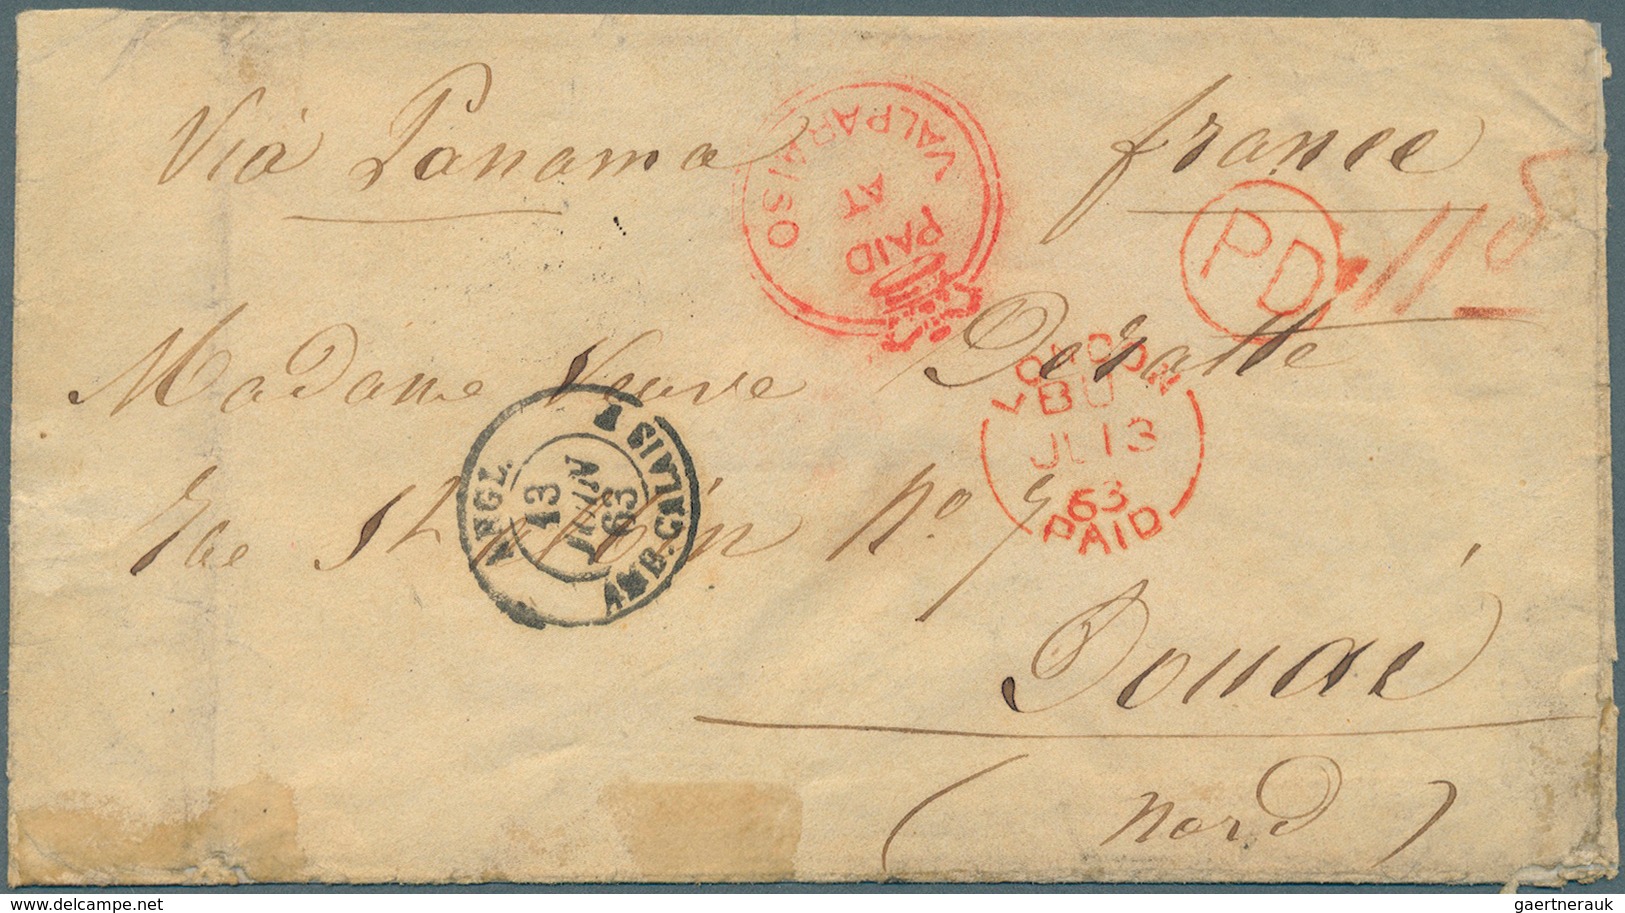 Chile: 1863, Stampless Folded Envelope Tied By Red Crown Mark "PAID AT VALPARAISO", Ms. "VIA PANAMA" - Chili